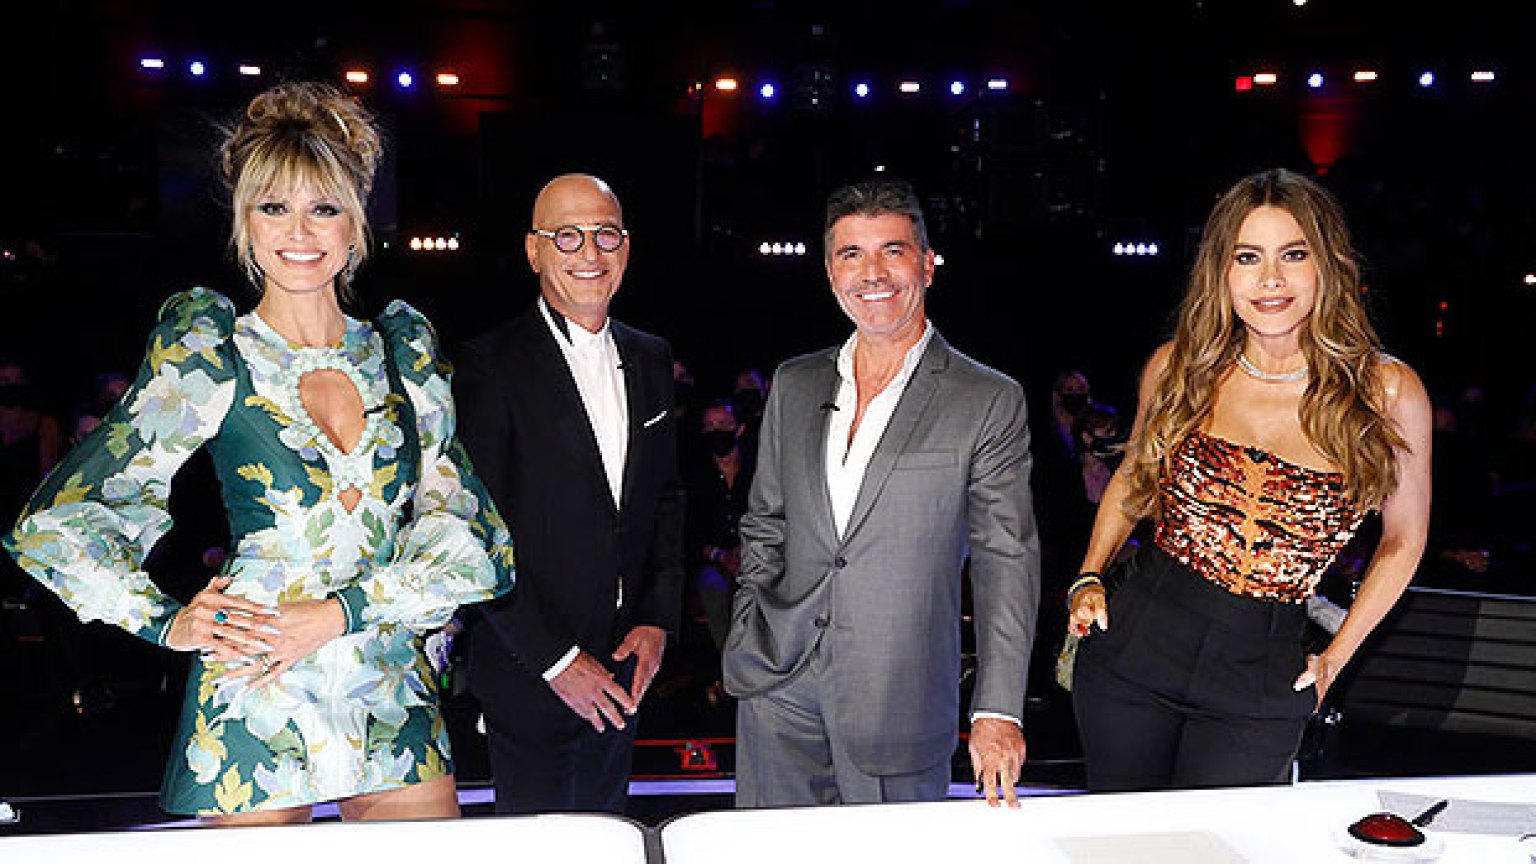 ‘AGT’ SemiFinals Results Who Made It To The Finals? — Recap